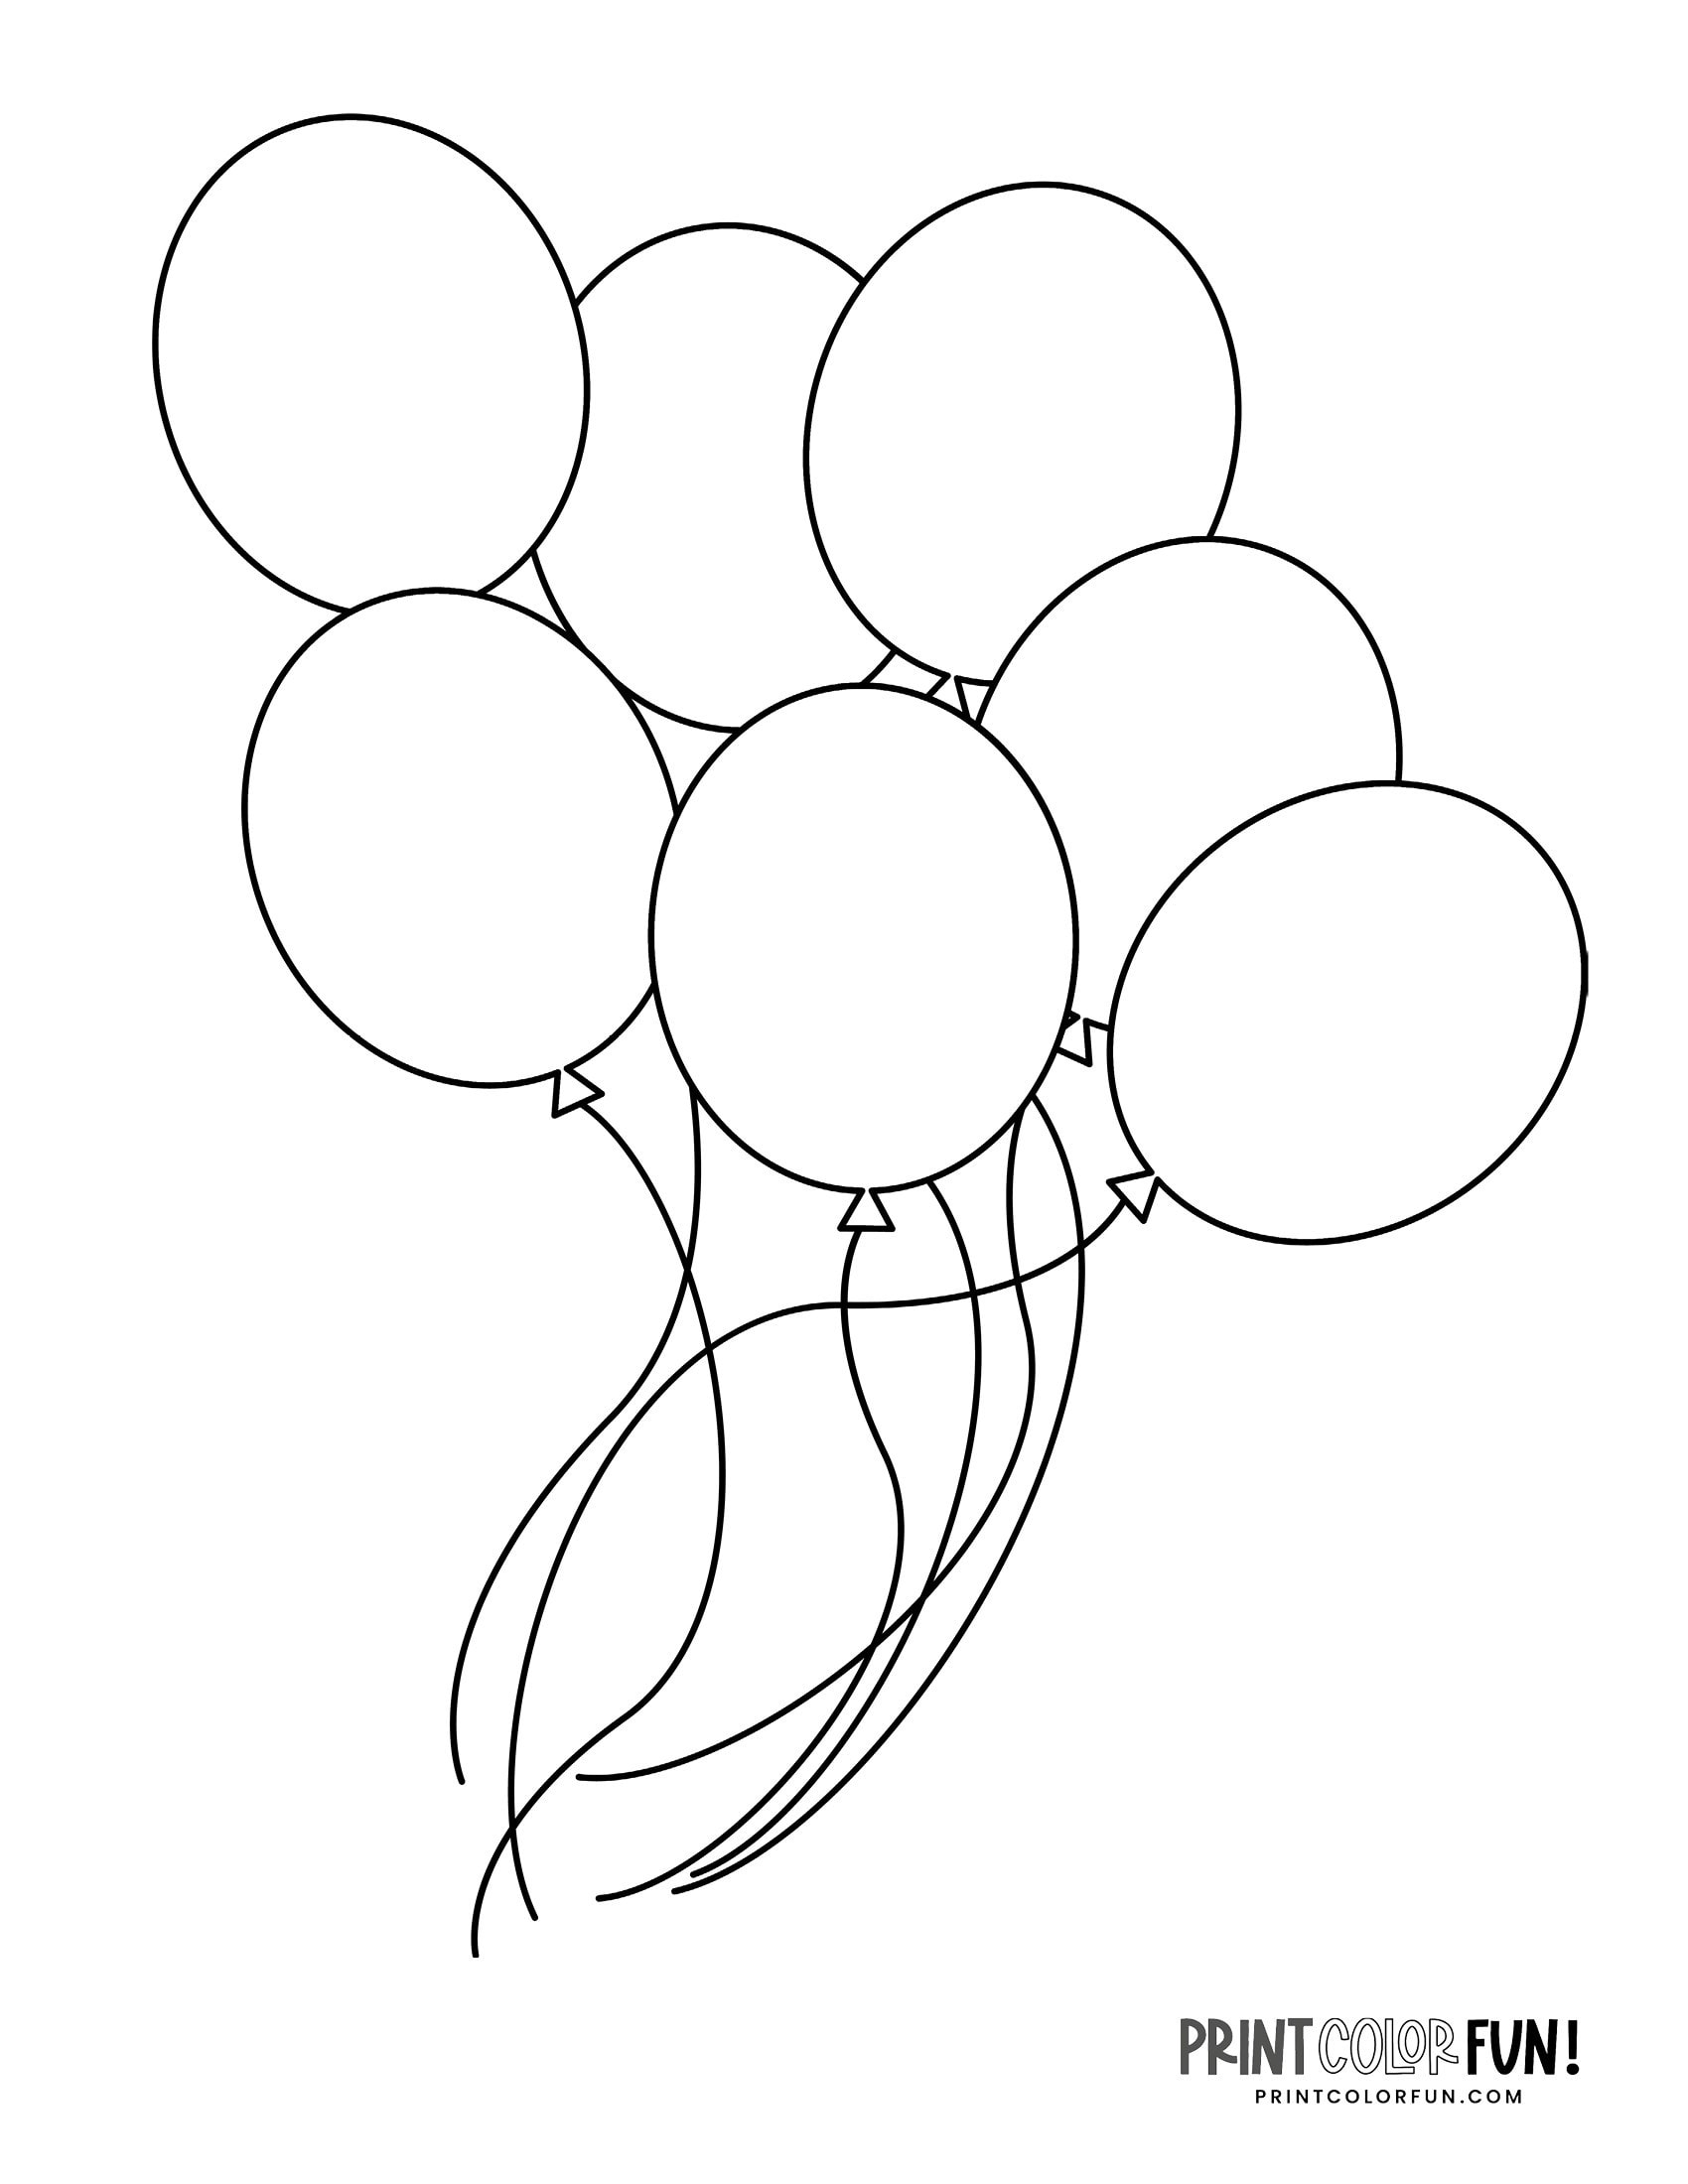 Party balloon coloring pages - Print Color Fun!